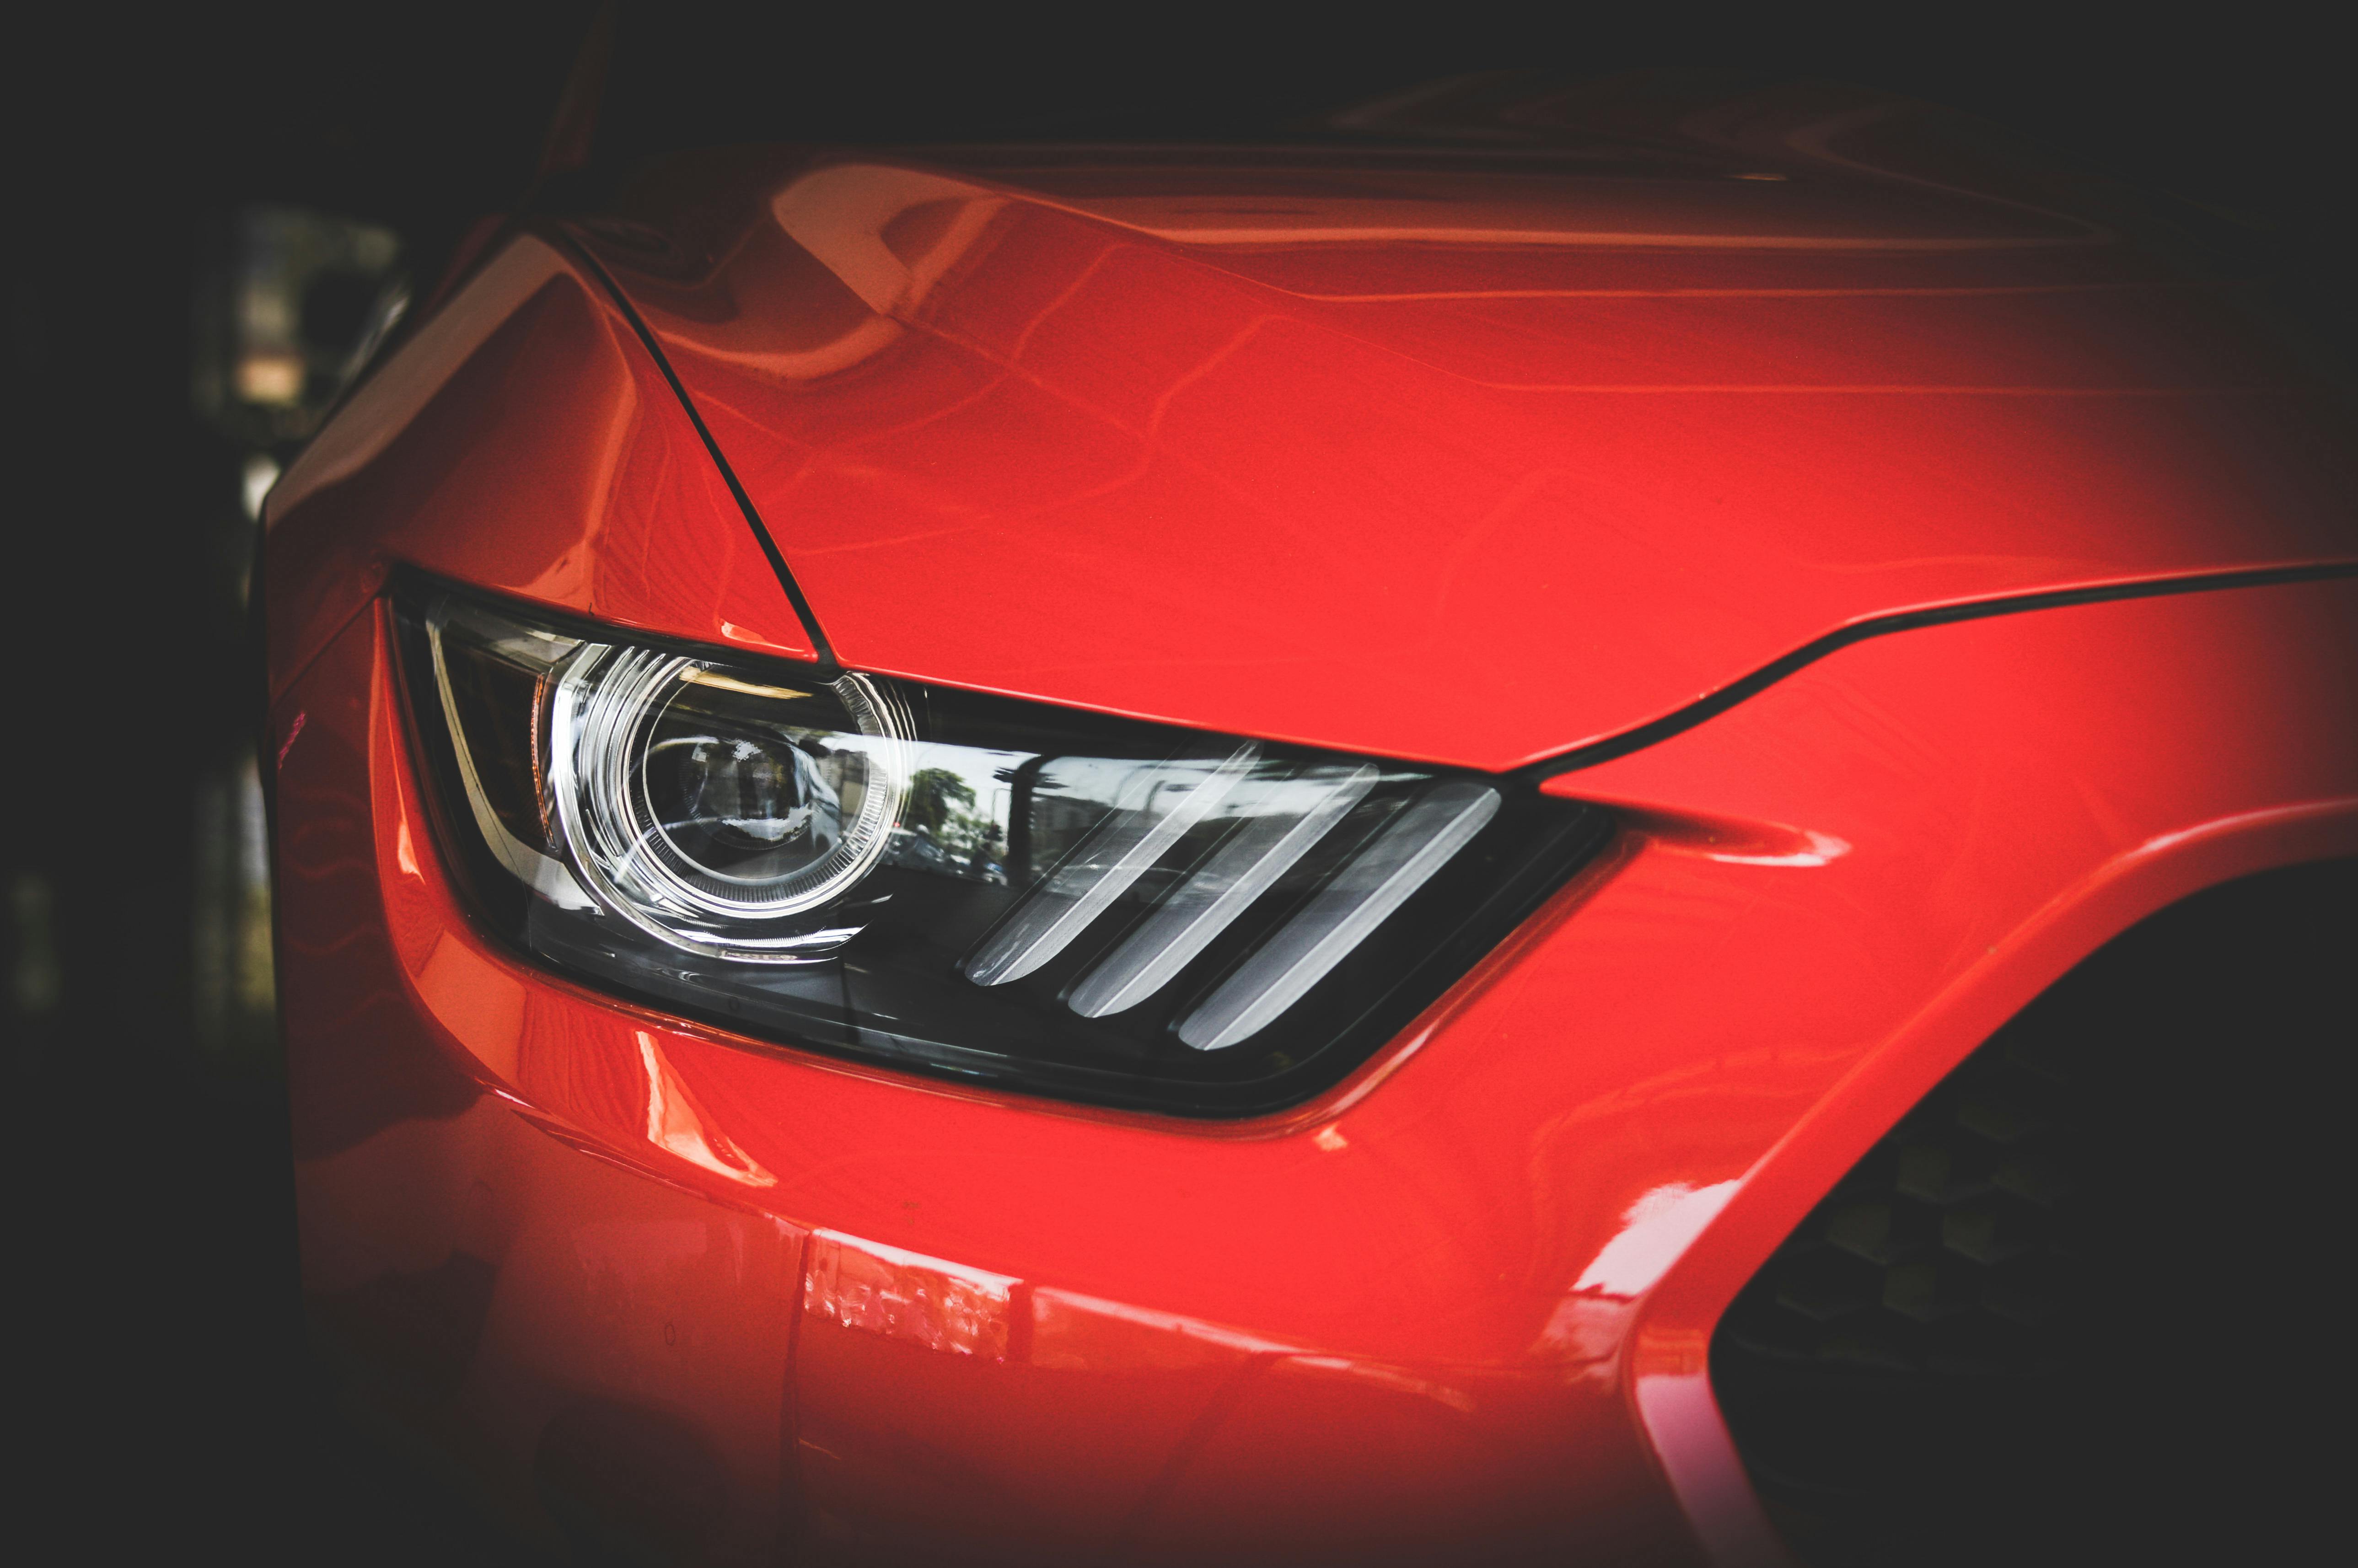 56,717 Red Engine Car Stock Photos - Free & Royalty-Free Stock